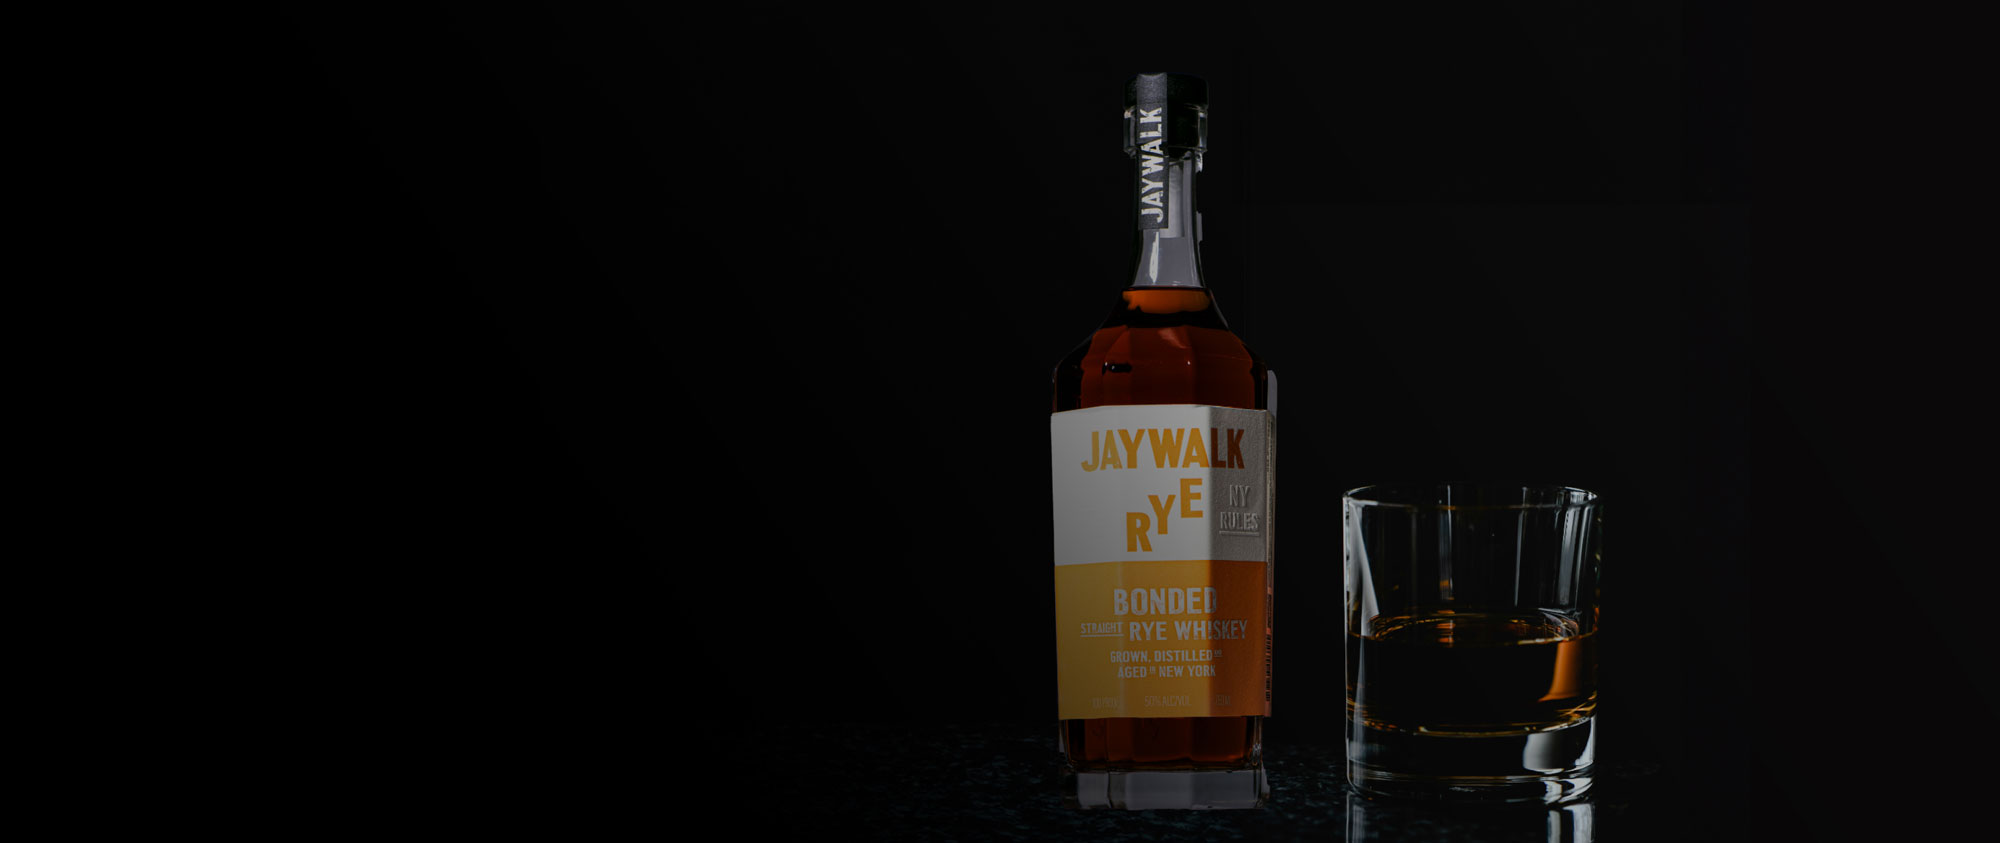 Jaywalk straight bonded rye whiskey’s flavor profile with tropical and herbal notes.